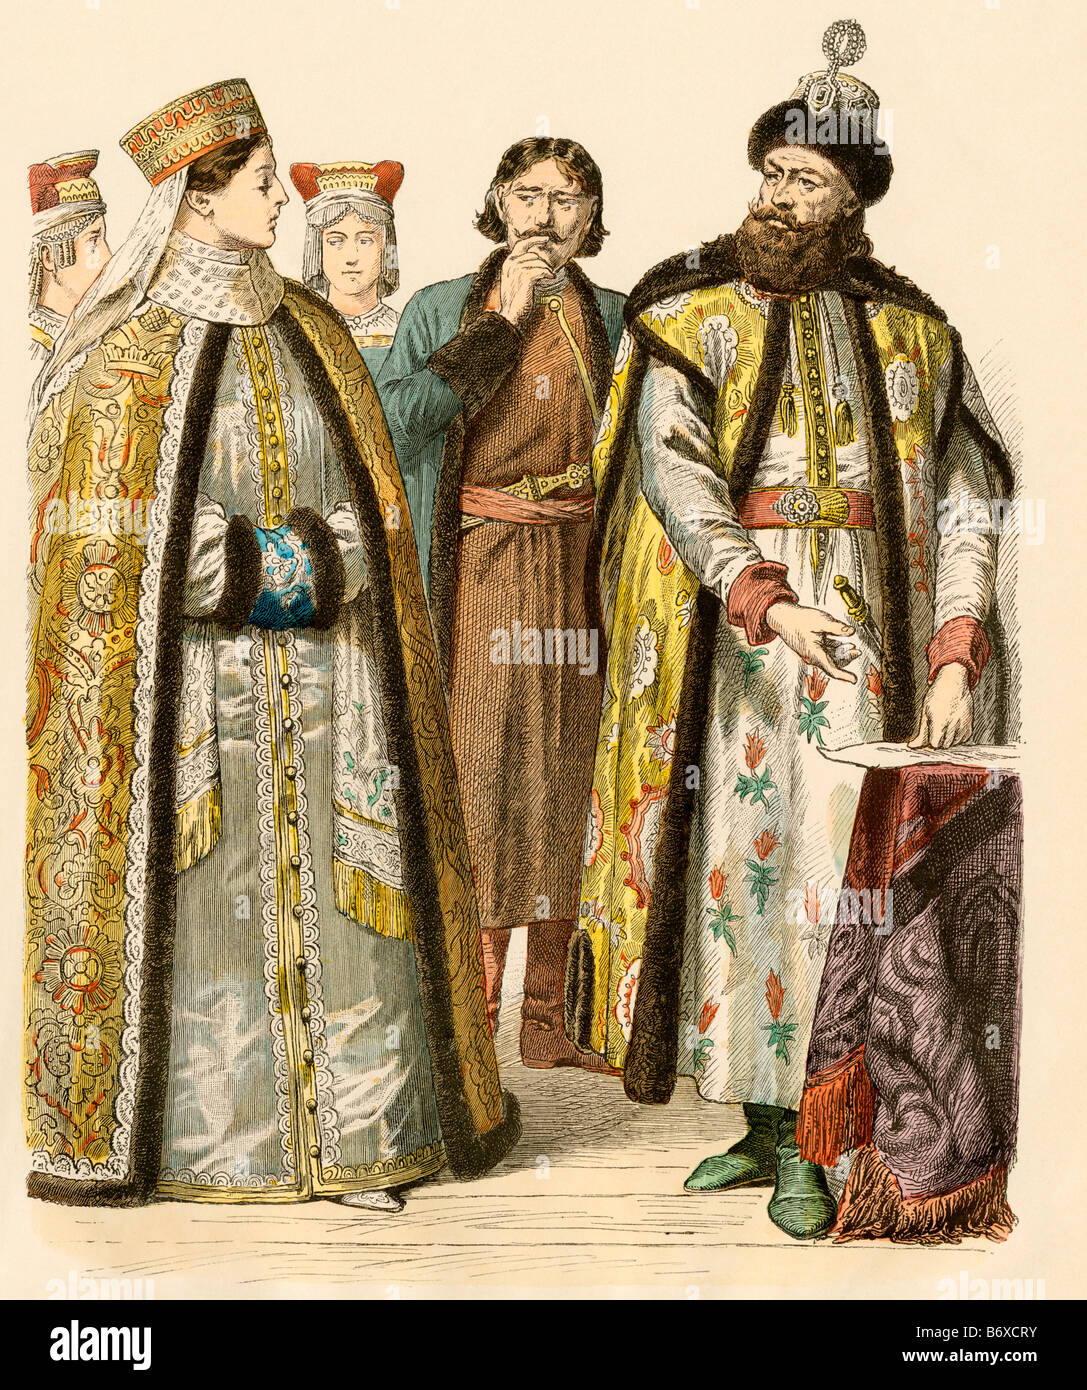 Russian boyars or nobles during the time of Peter the Great 1600s 1700s. Hand-colored print Stock Photo